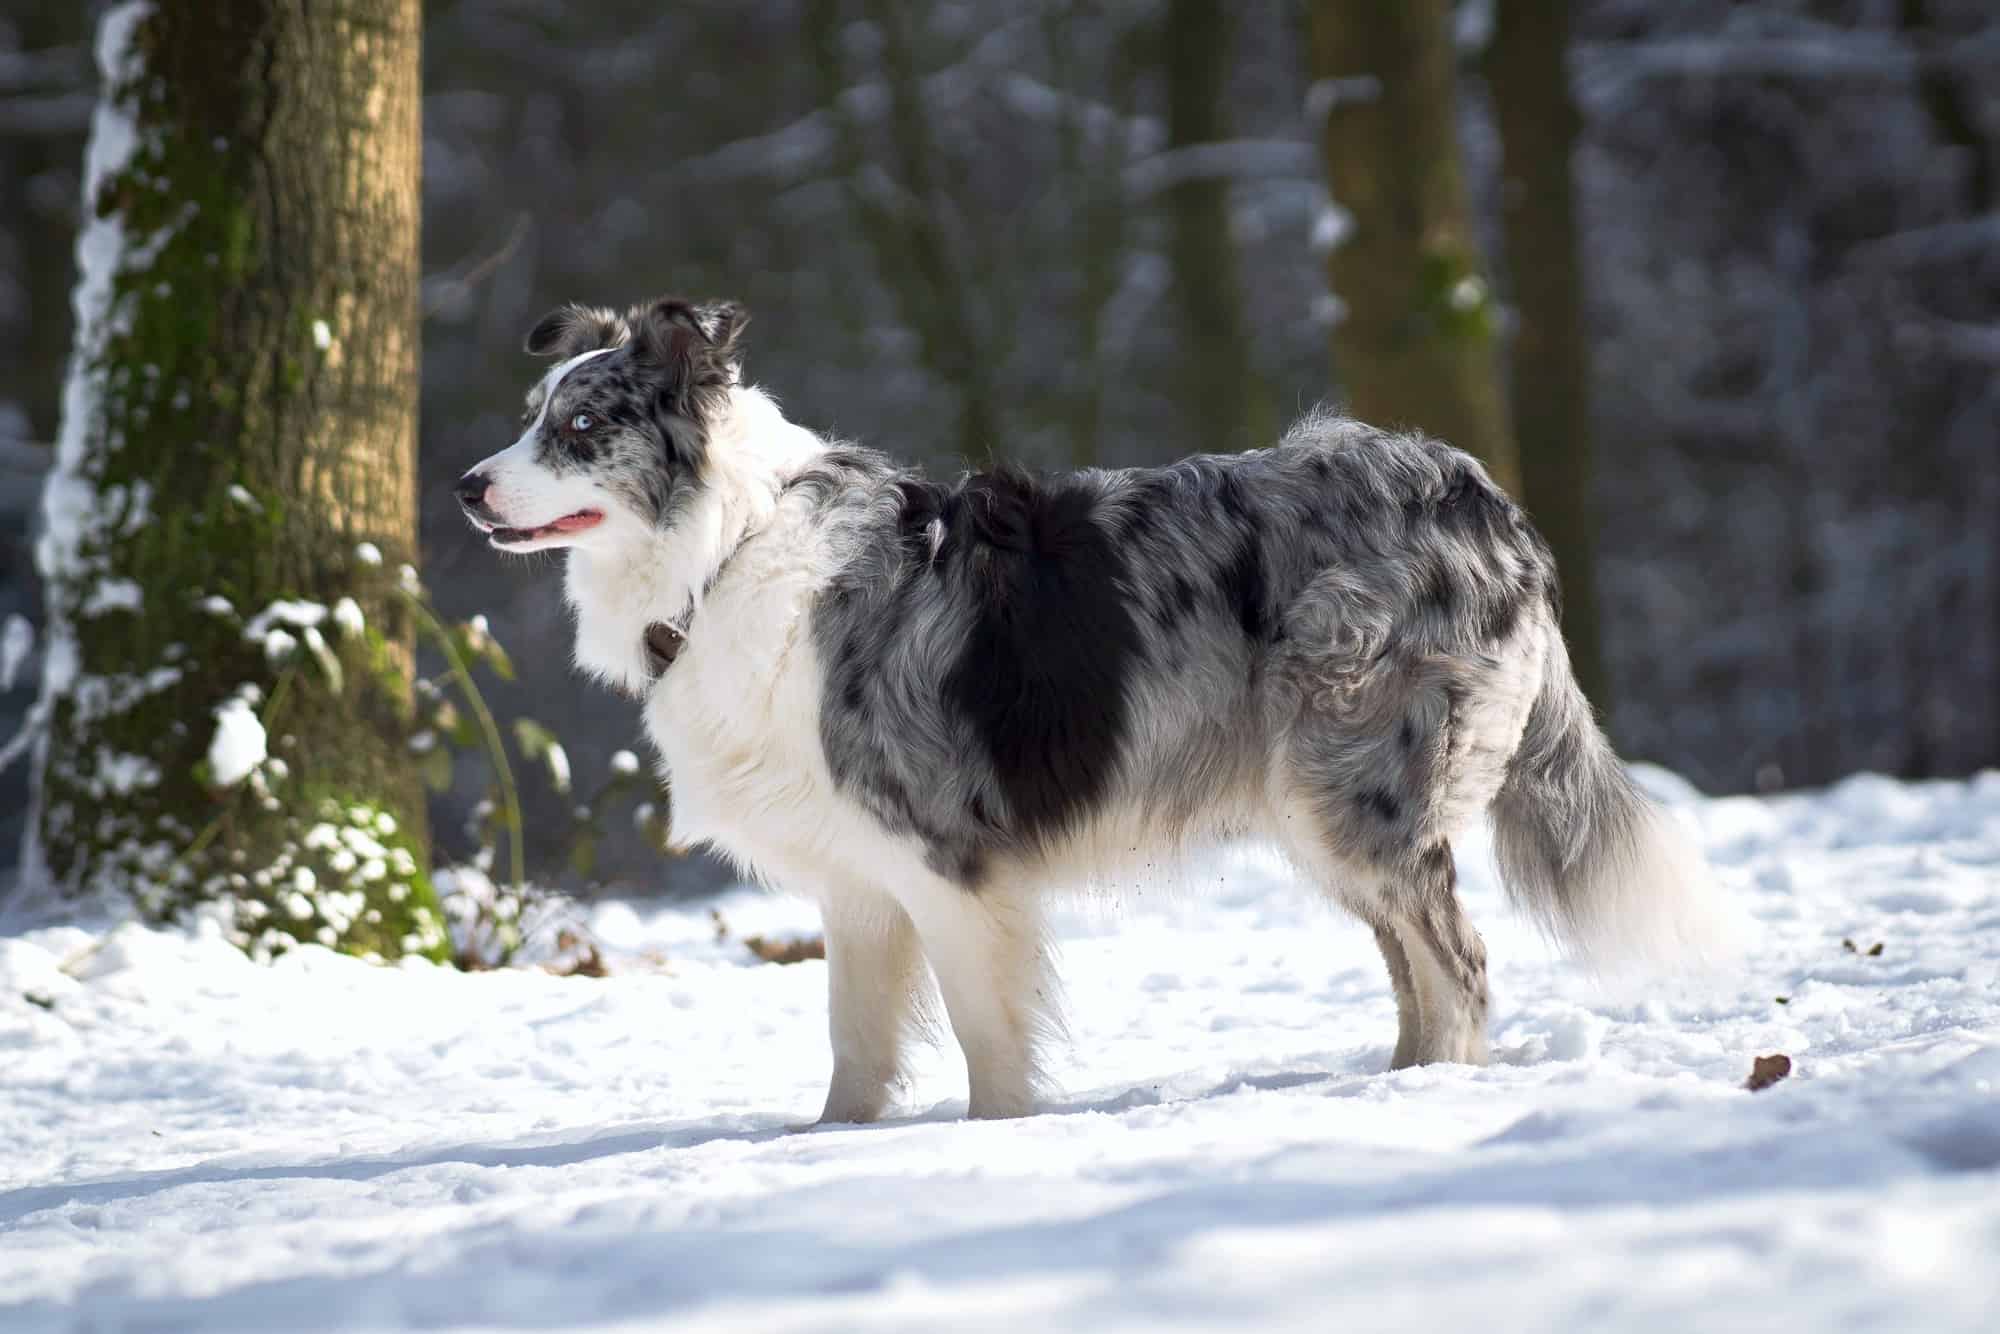 A blue merle border collie in a snowy forest.